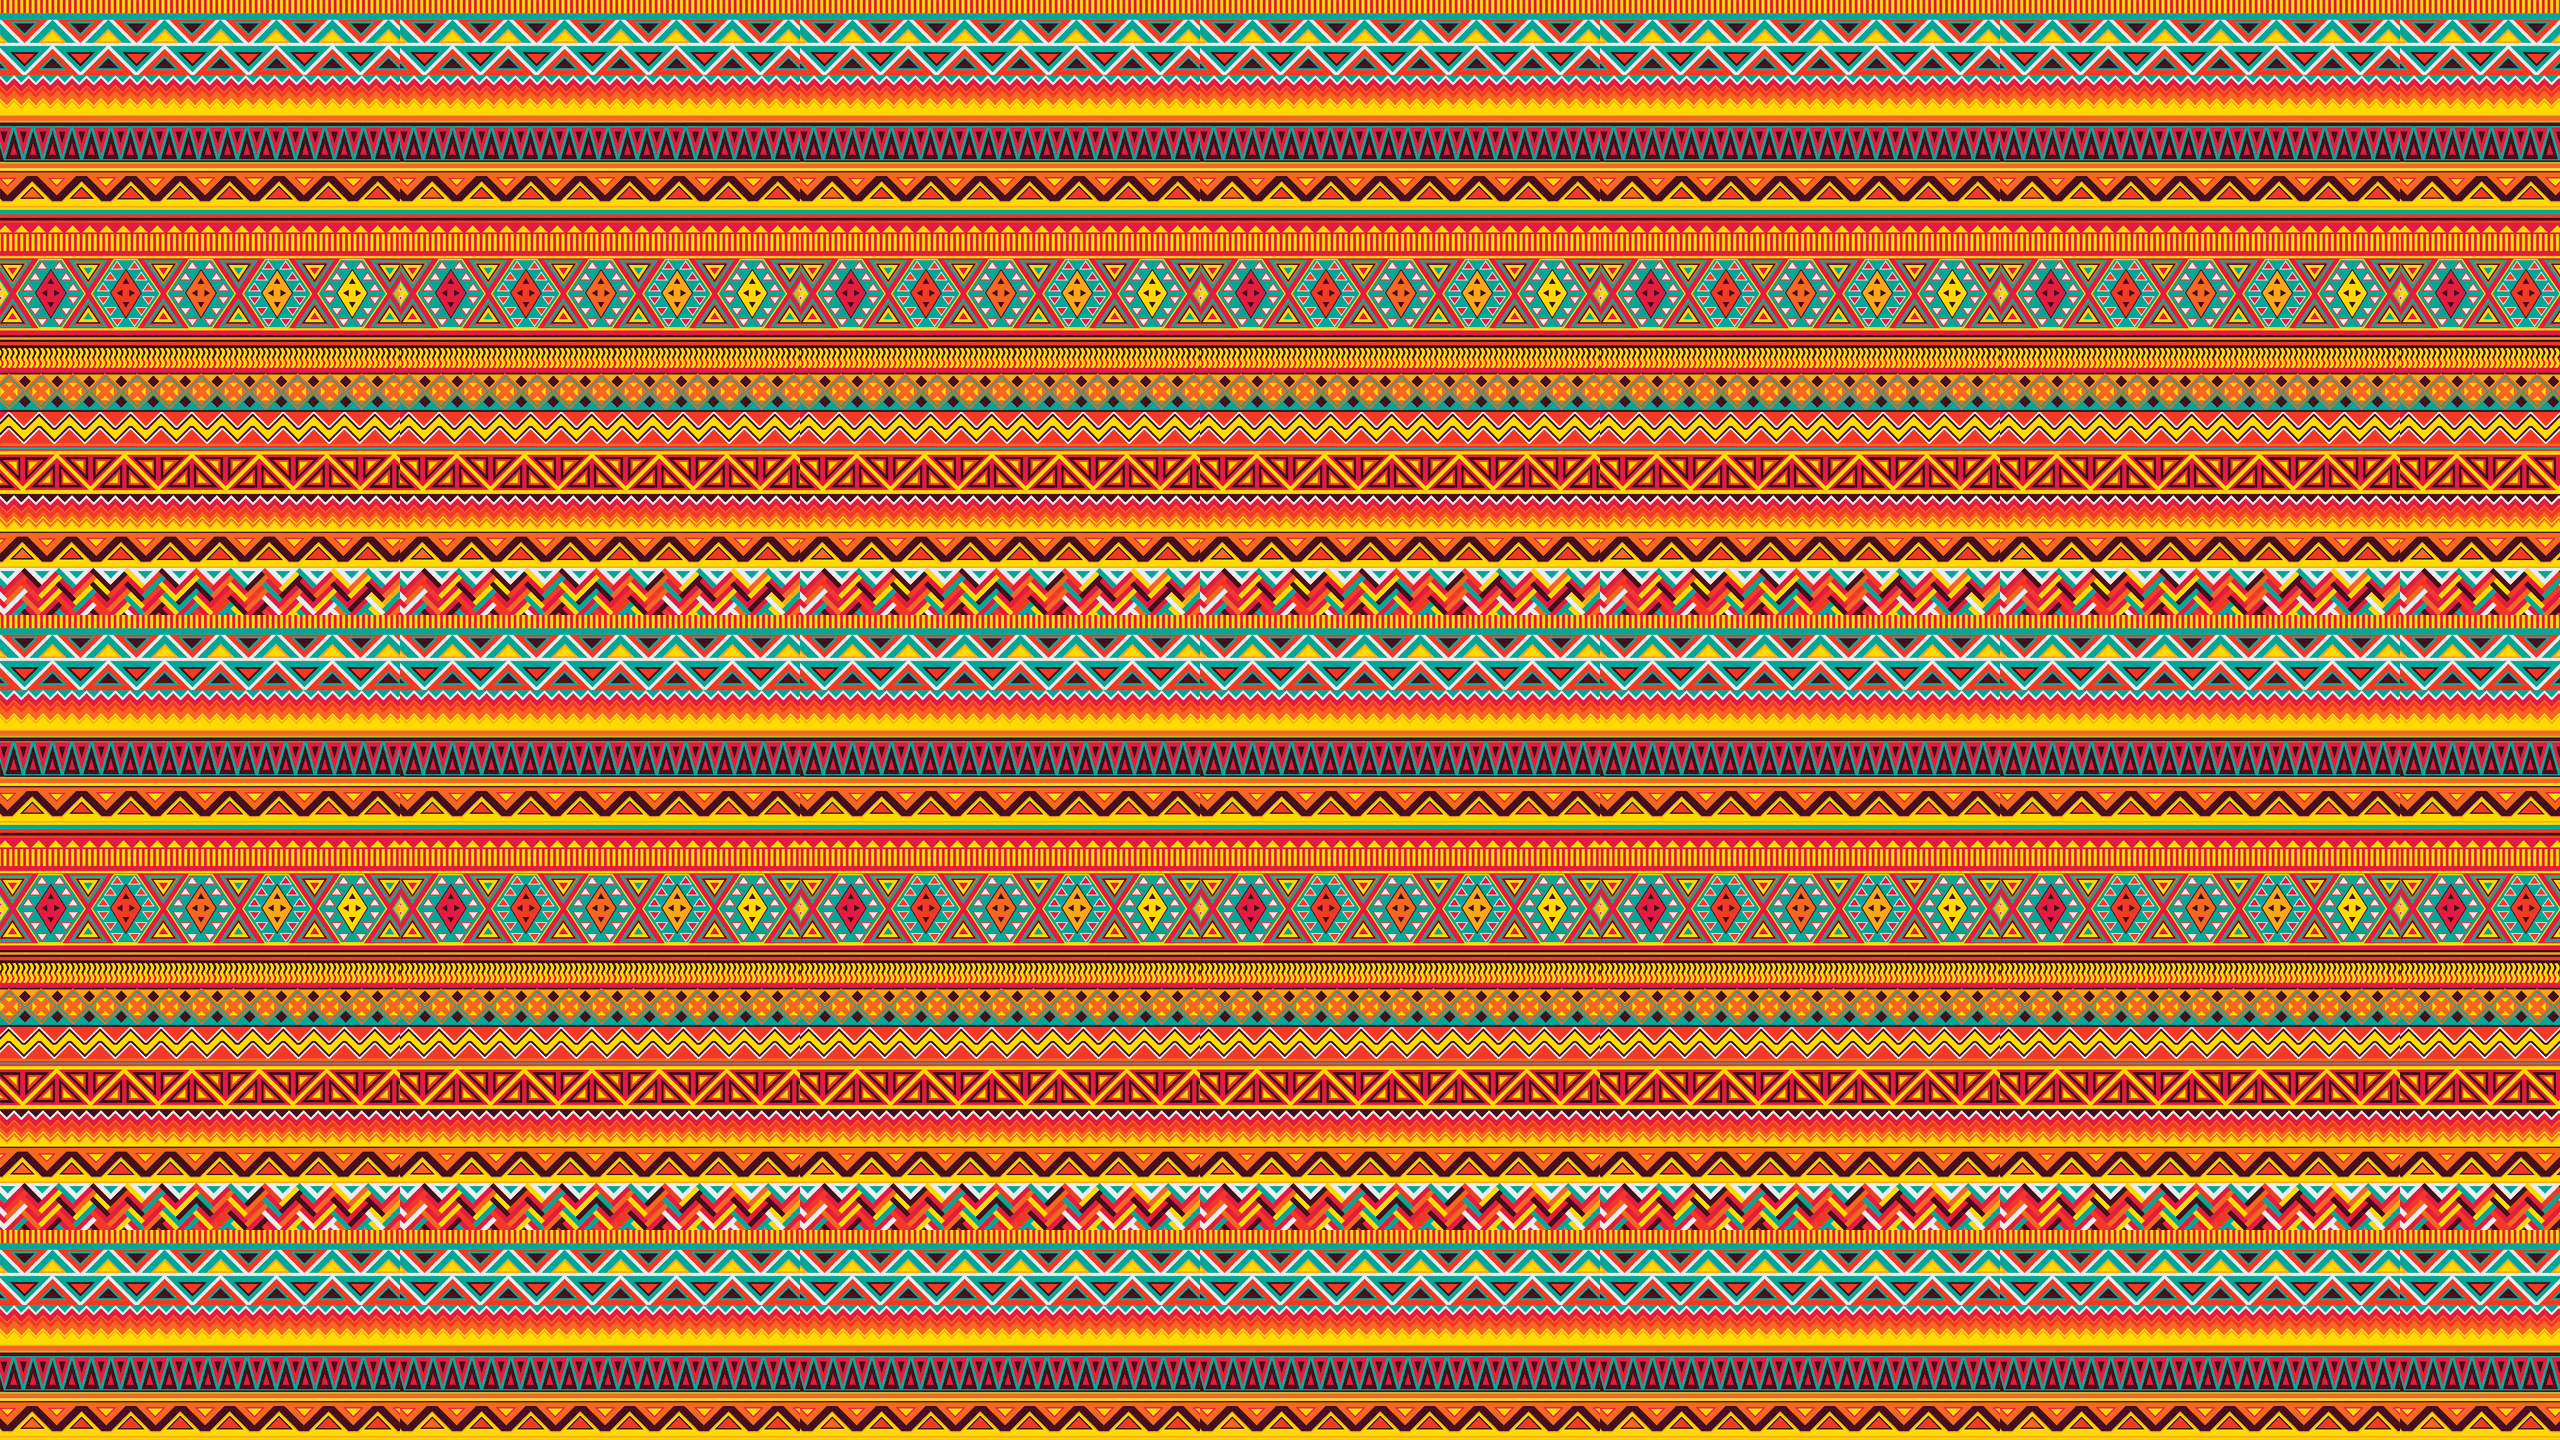 This Aztec Desktop Wallpaper Is Easy Just Save The